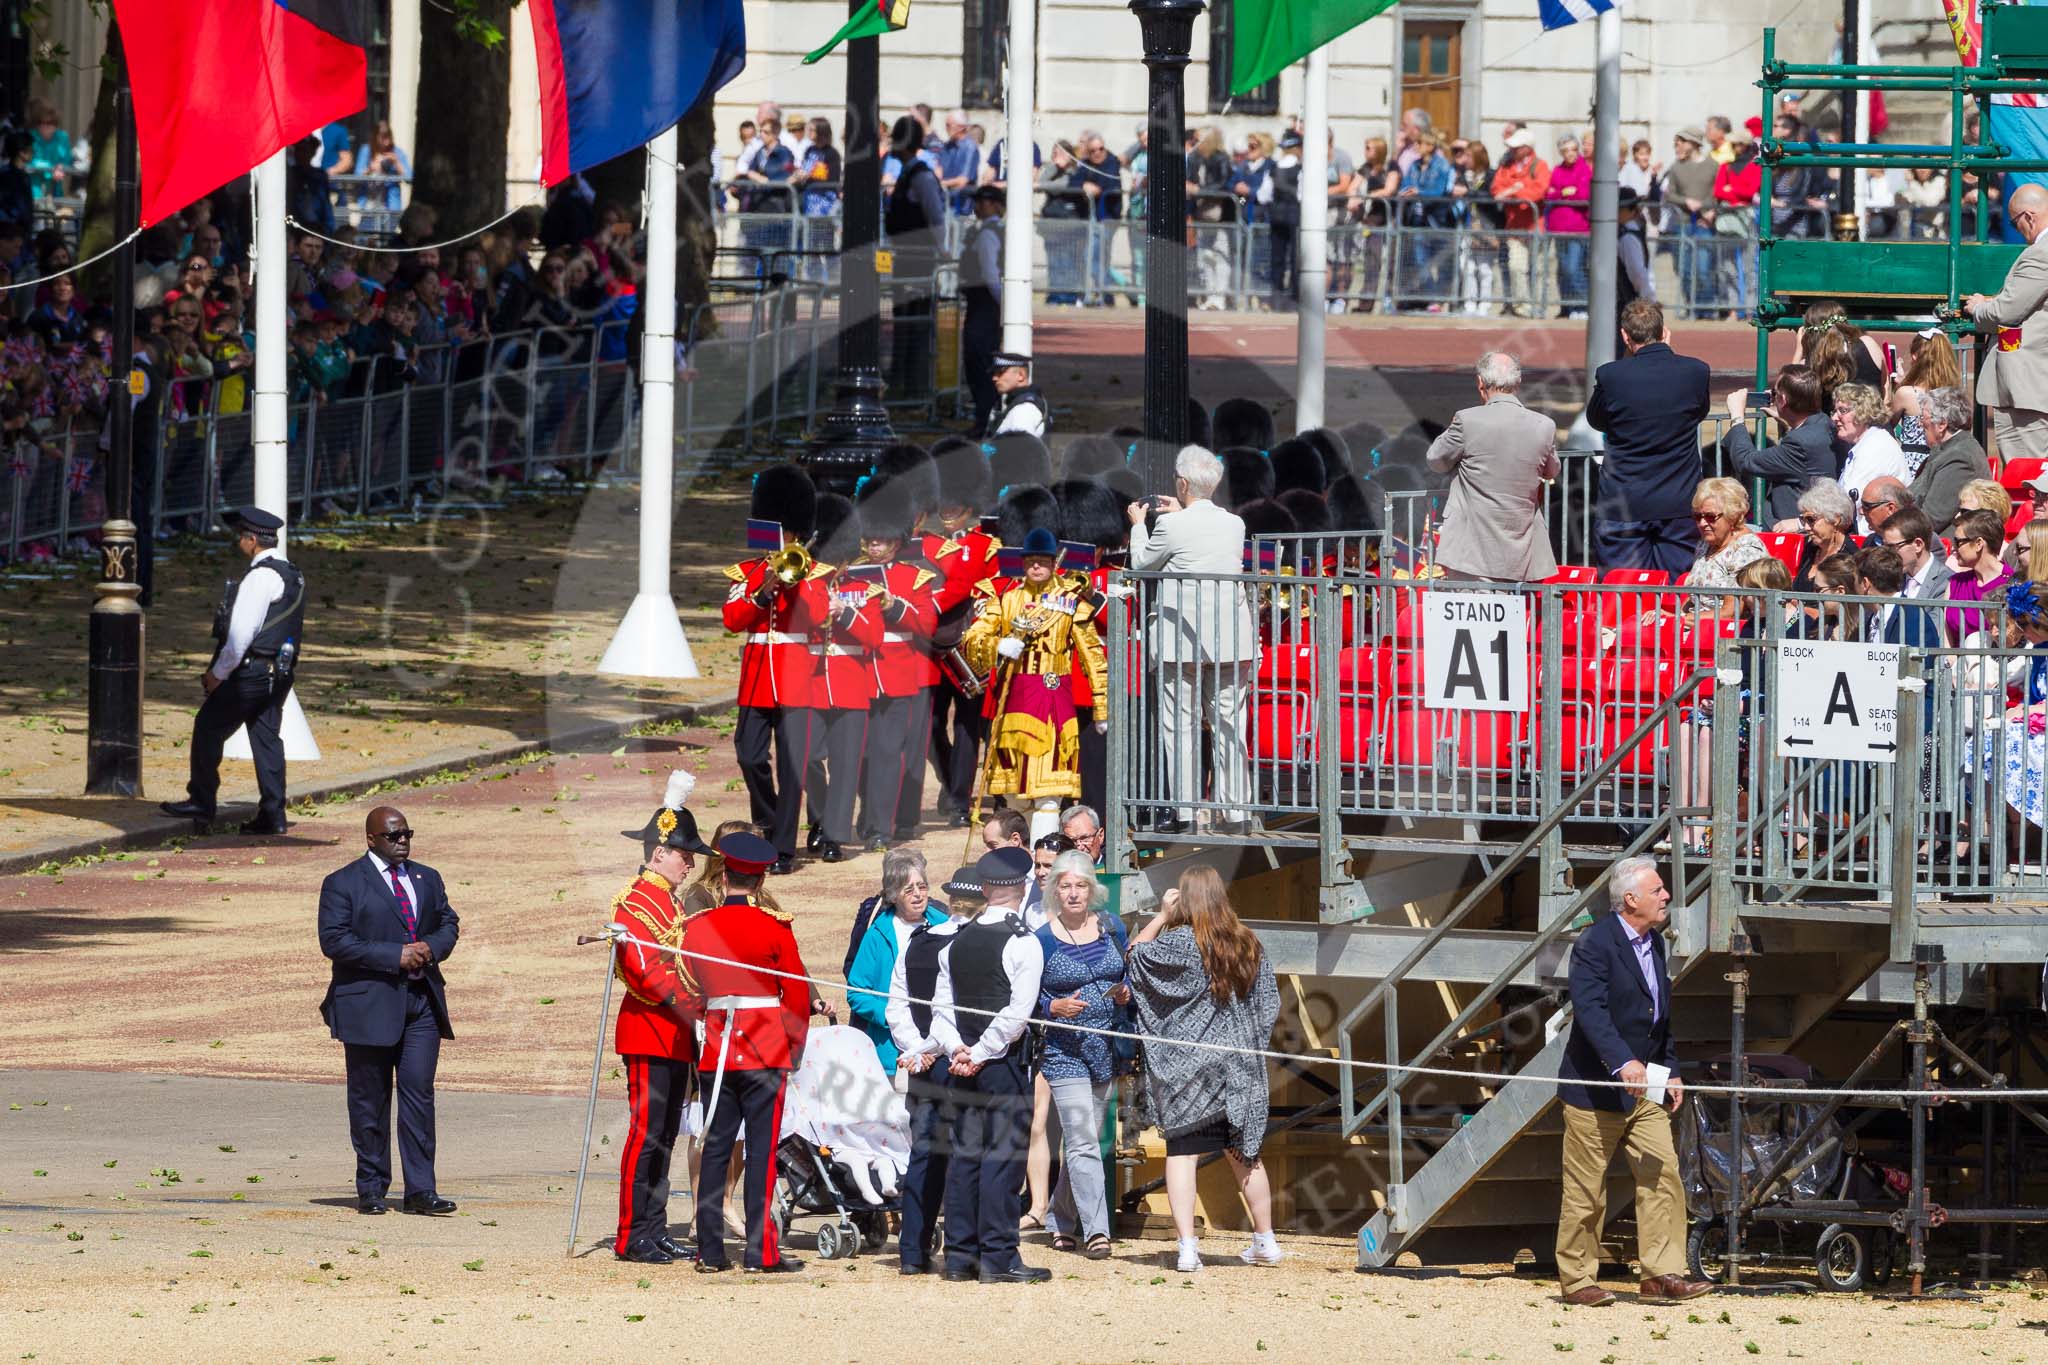 The Colonel's Review 2015.
Horse Guards Parade, Westminster,
London,

United Kingdom,
on 06 June 2015 at 10:12, image #25